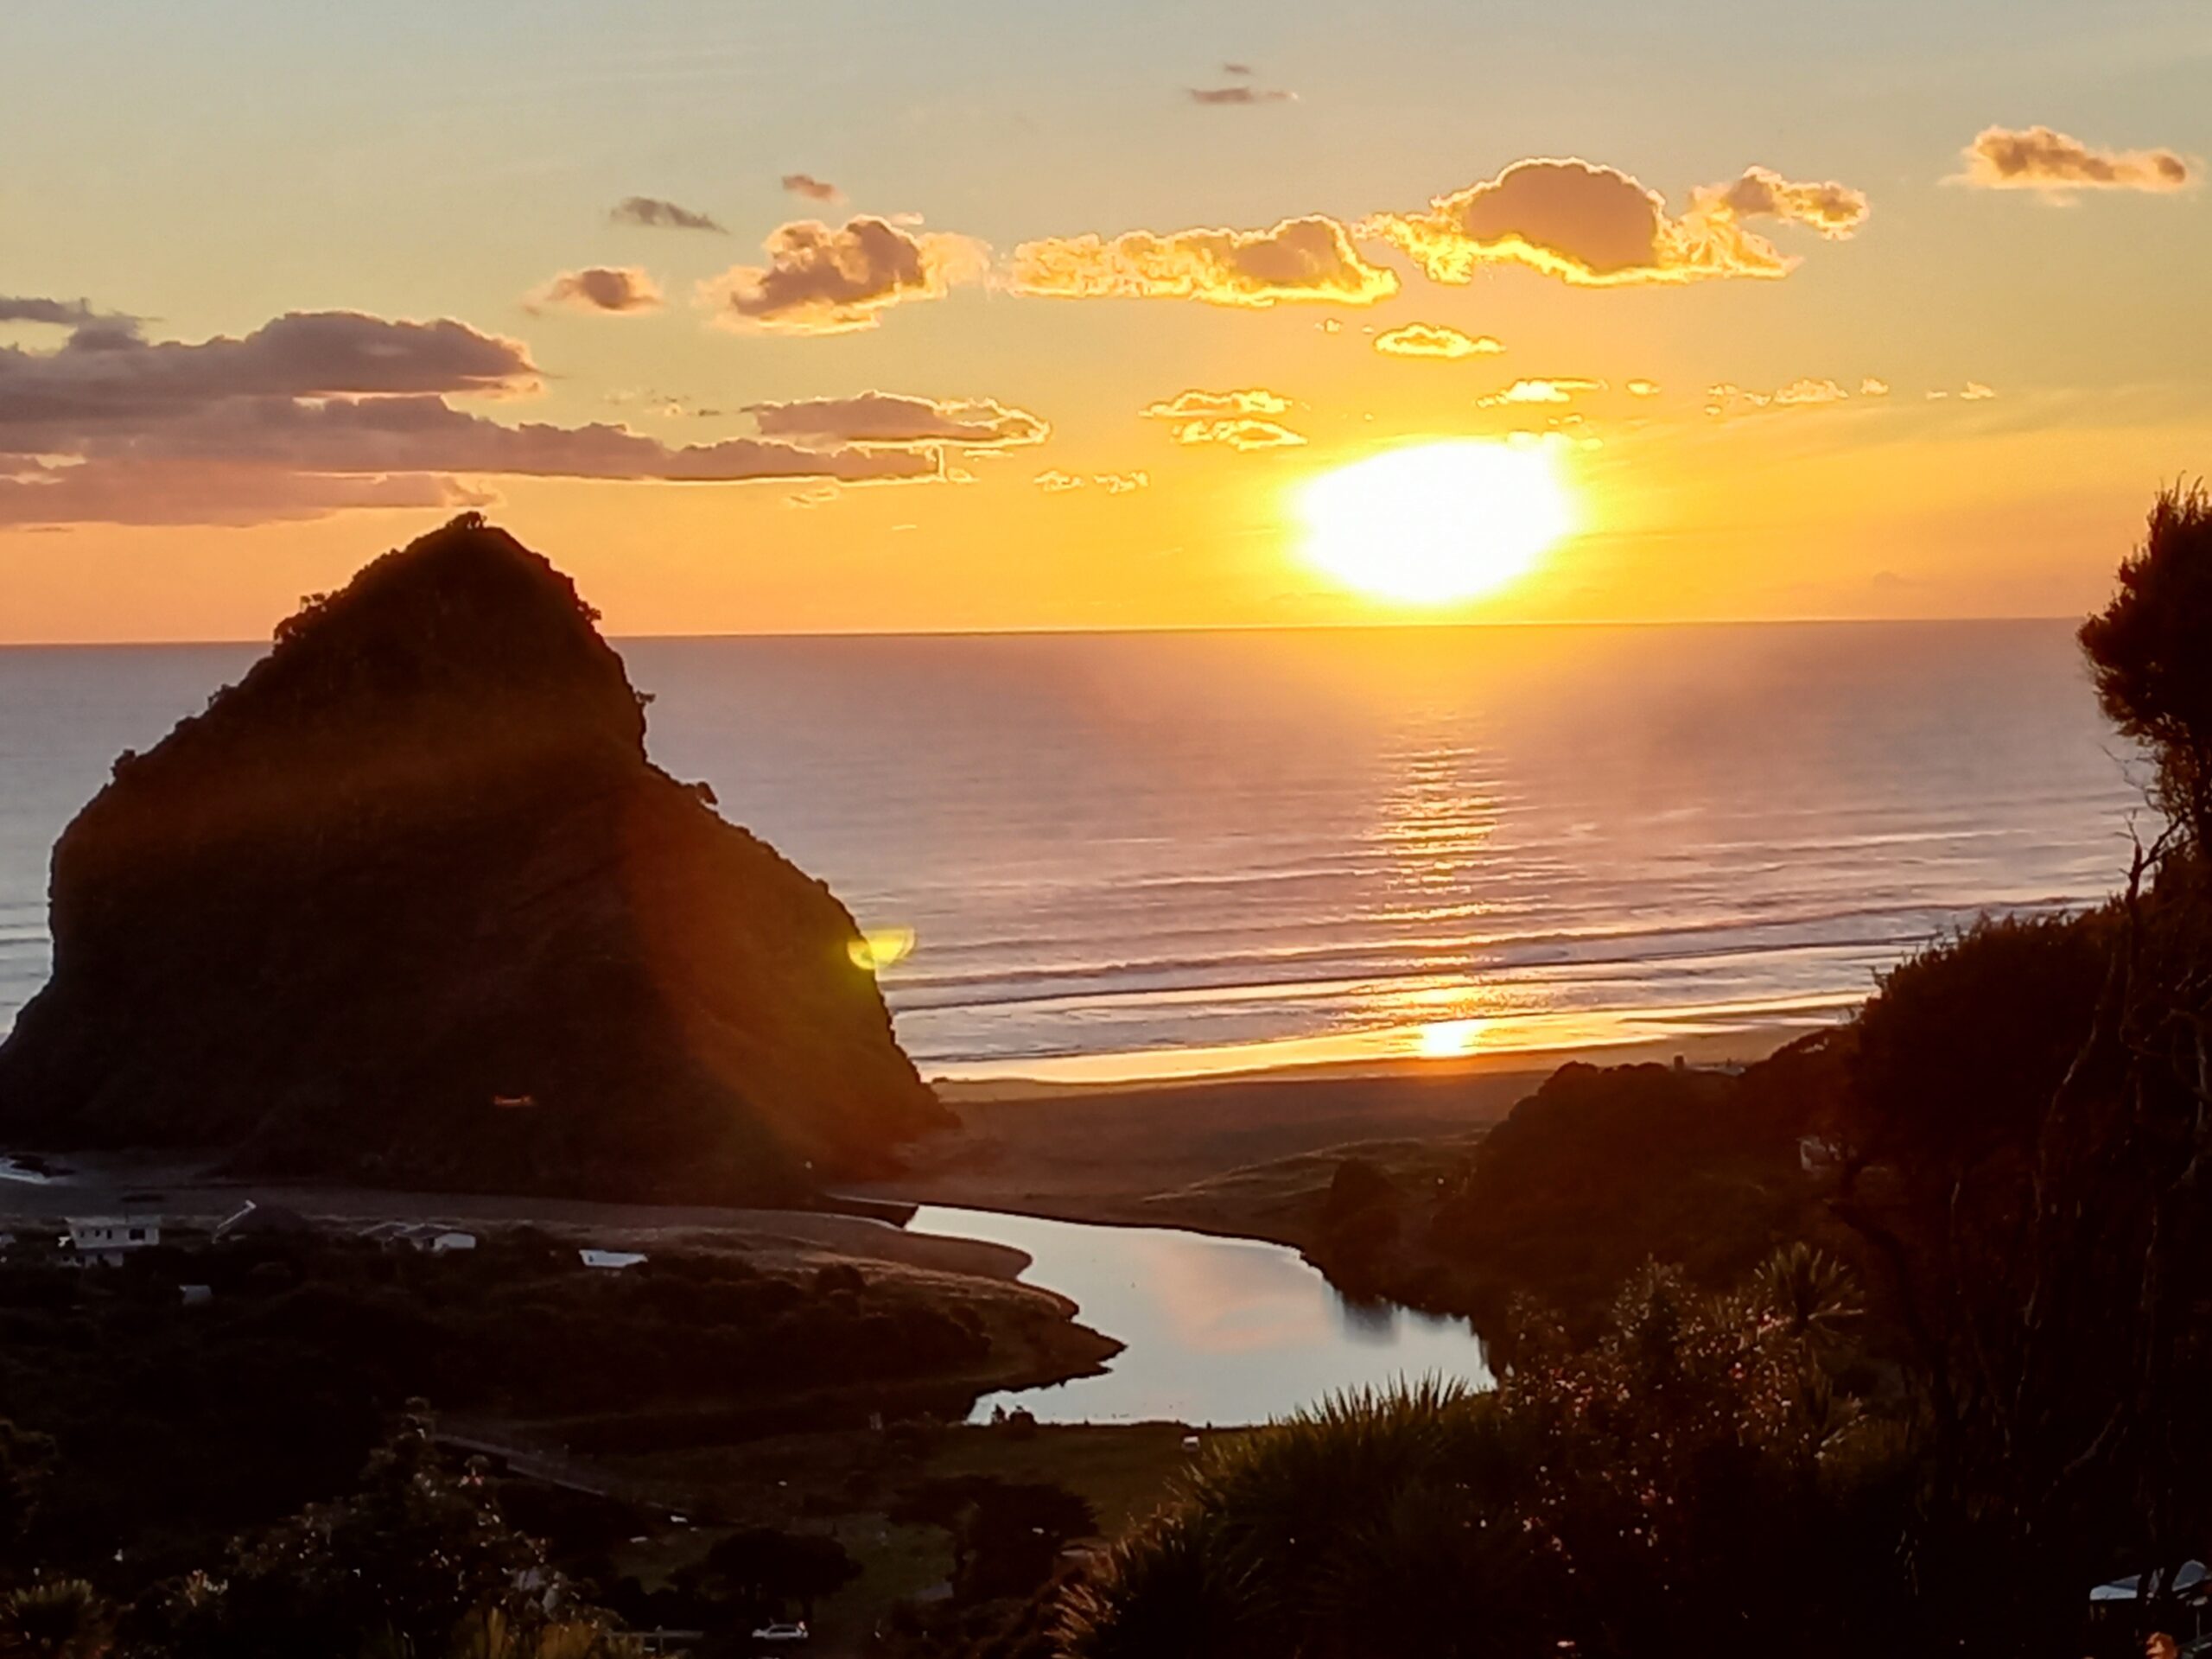 Photo of Piha is a village, west of Auckland, on New Zealand’s North Island. Black-sand Piha Beach is known for its strong surf and rugged scenery. Lion Rock is a volcanic monolith with war memorials and Maori carvings.